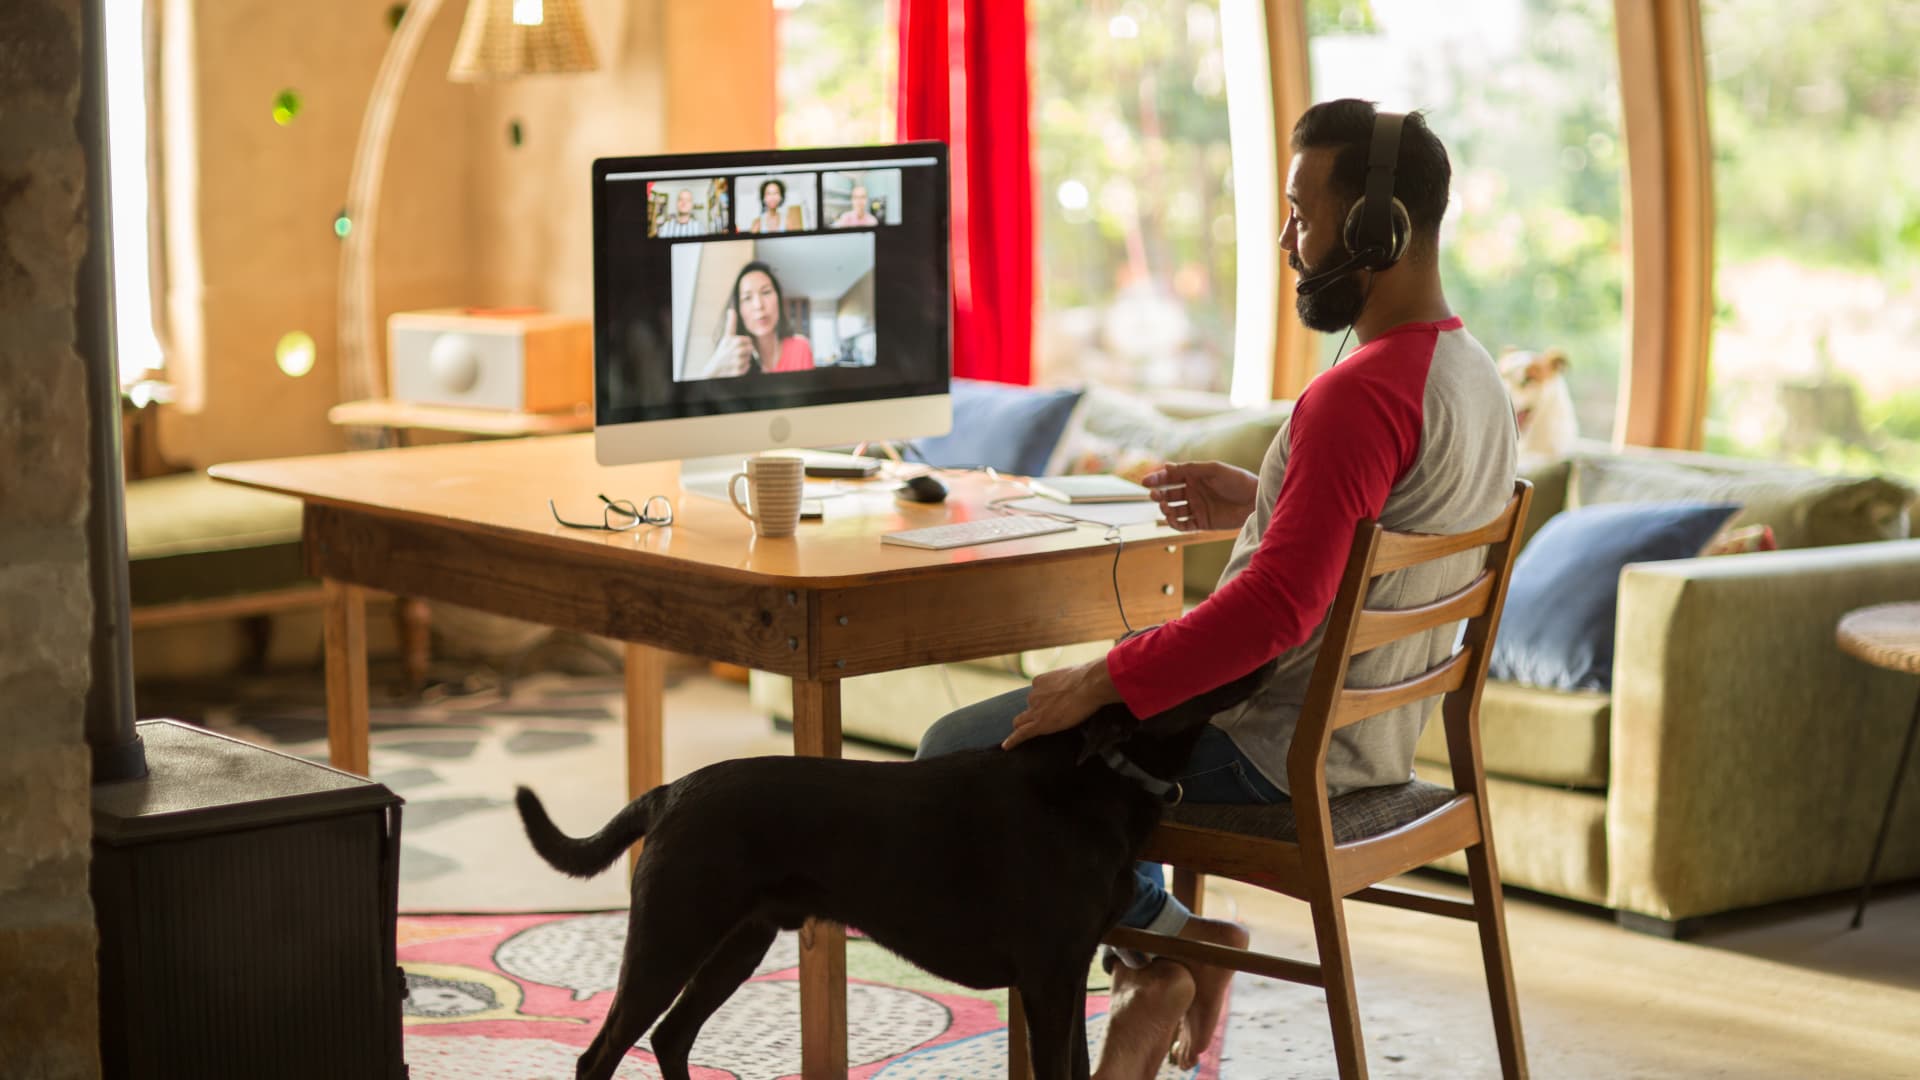 Use video chat to ask for an annual period of remote work to gauge your employer's body language, advises career coach Amanda Augustine.